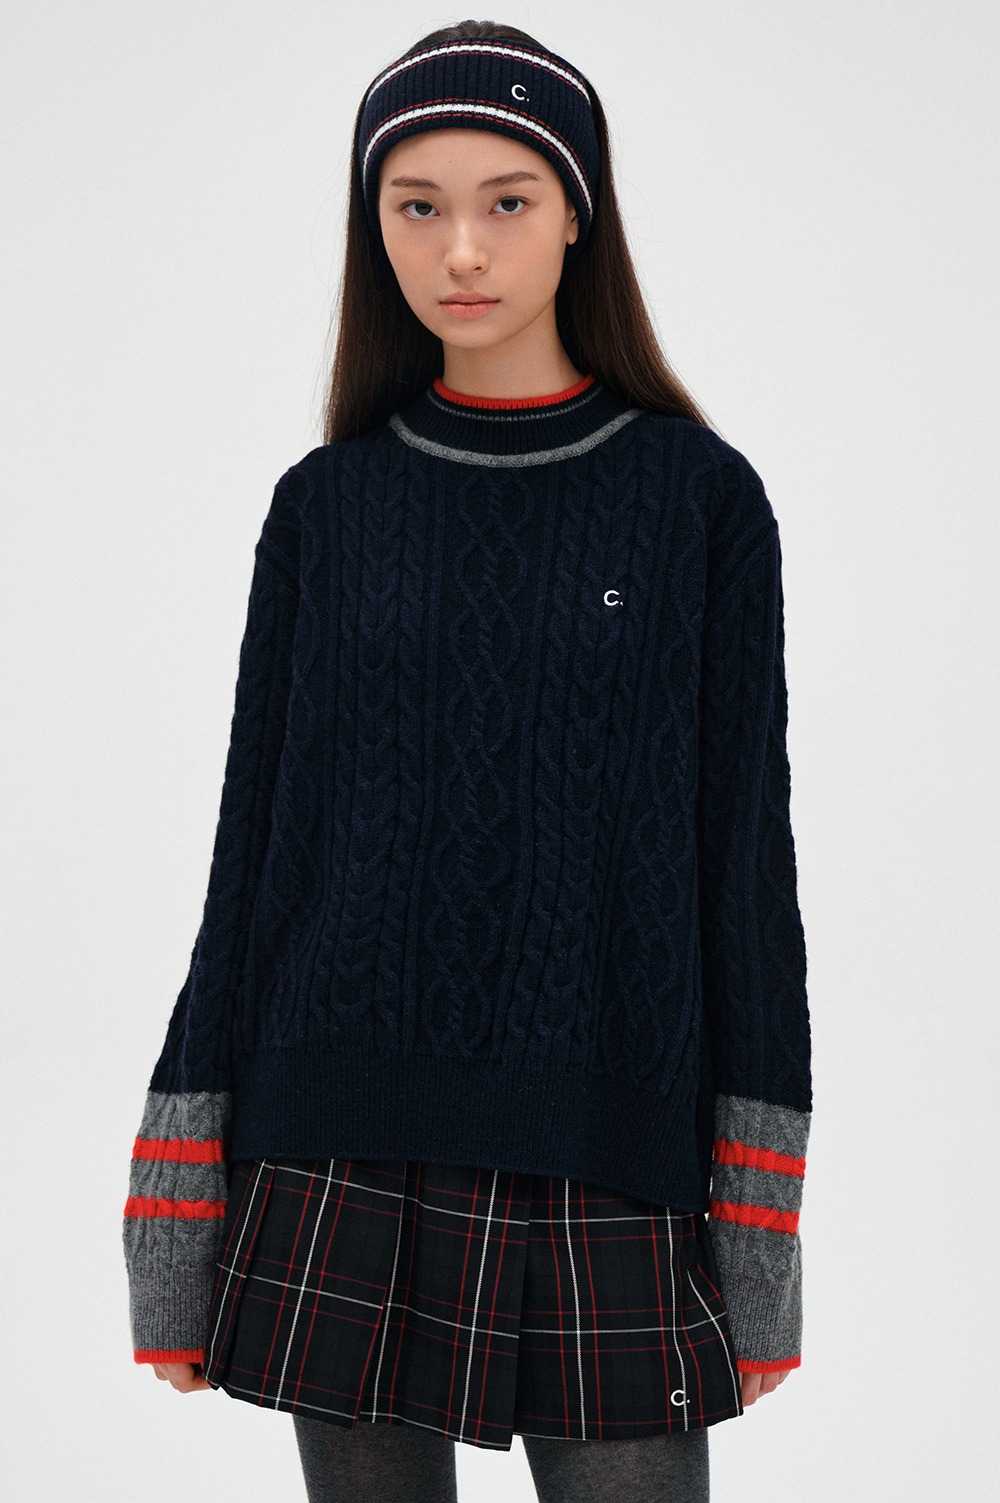 clove - [23FW clove] Cable Highneck Pullover (Navy)